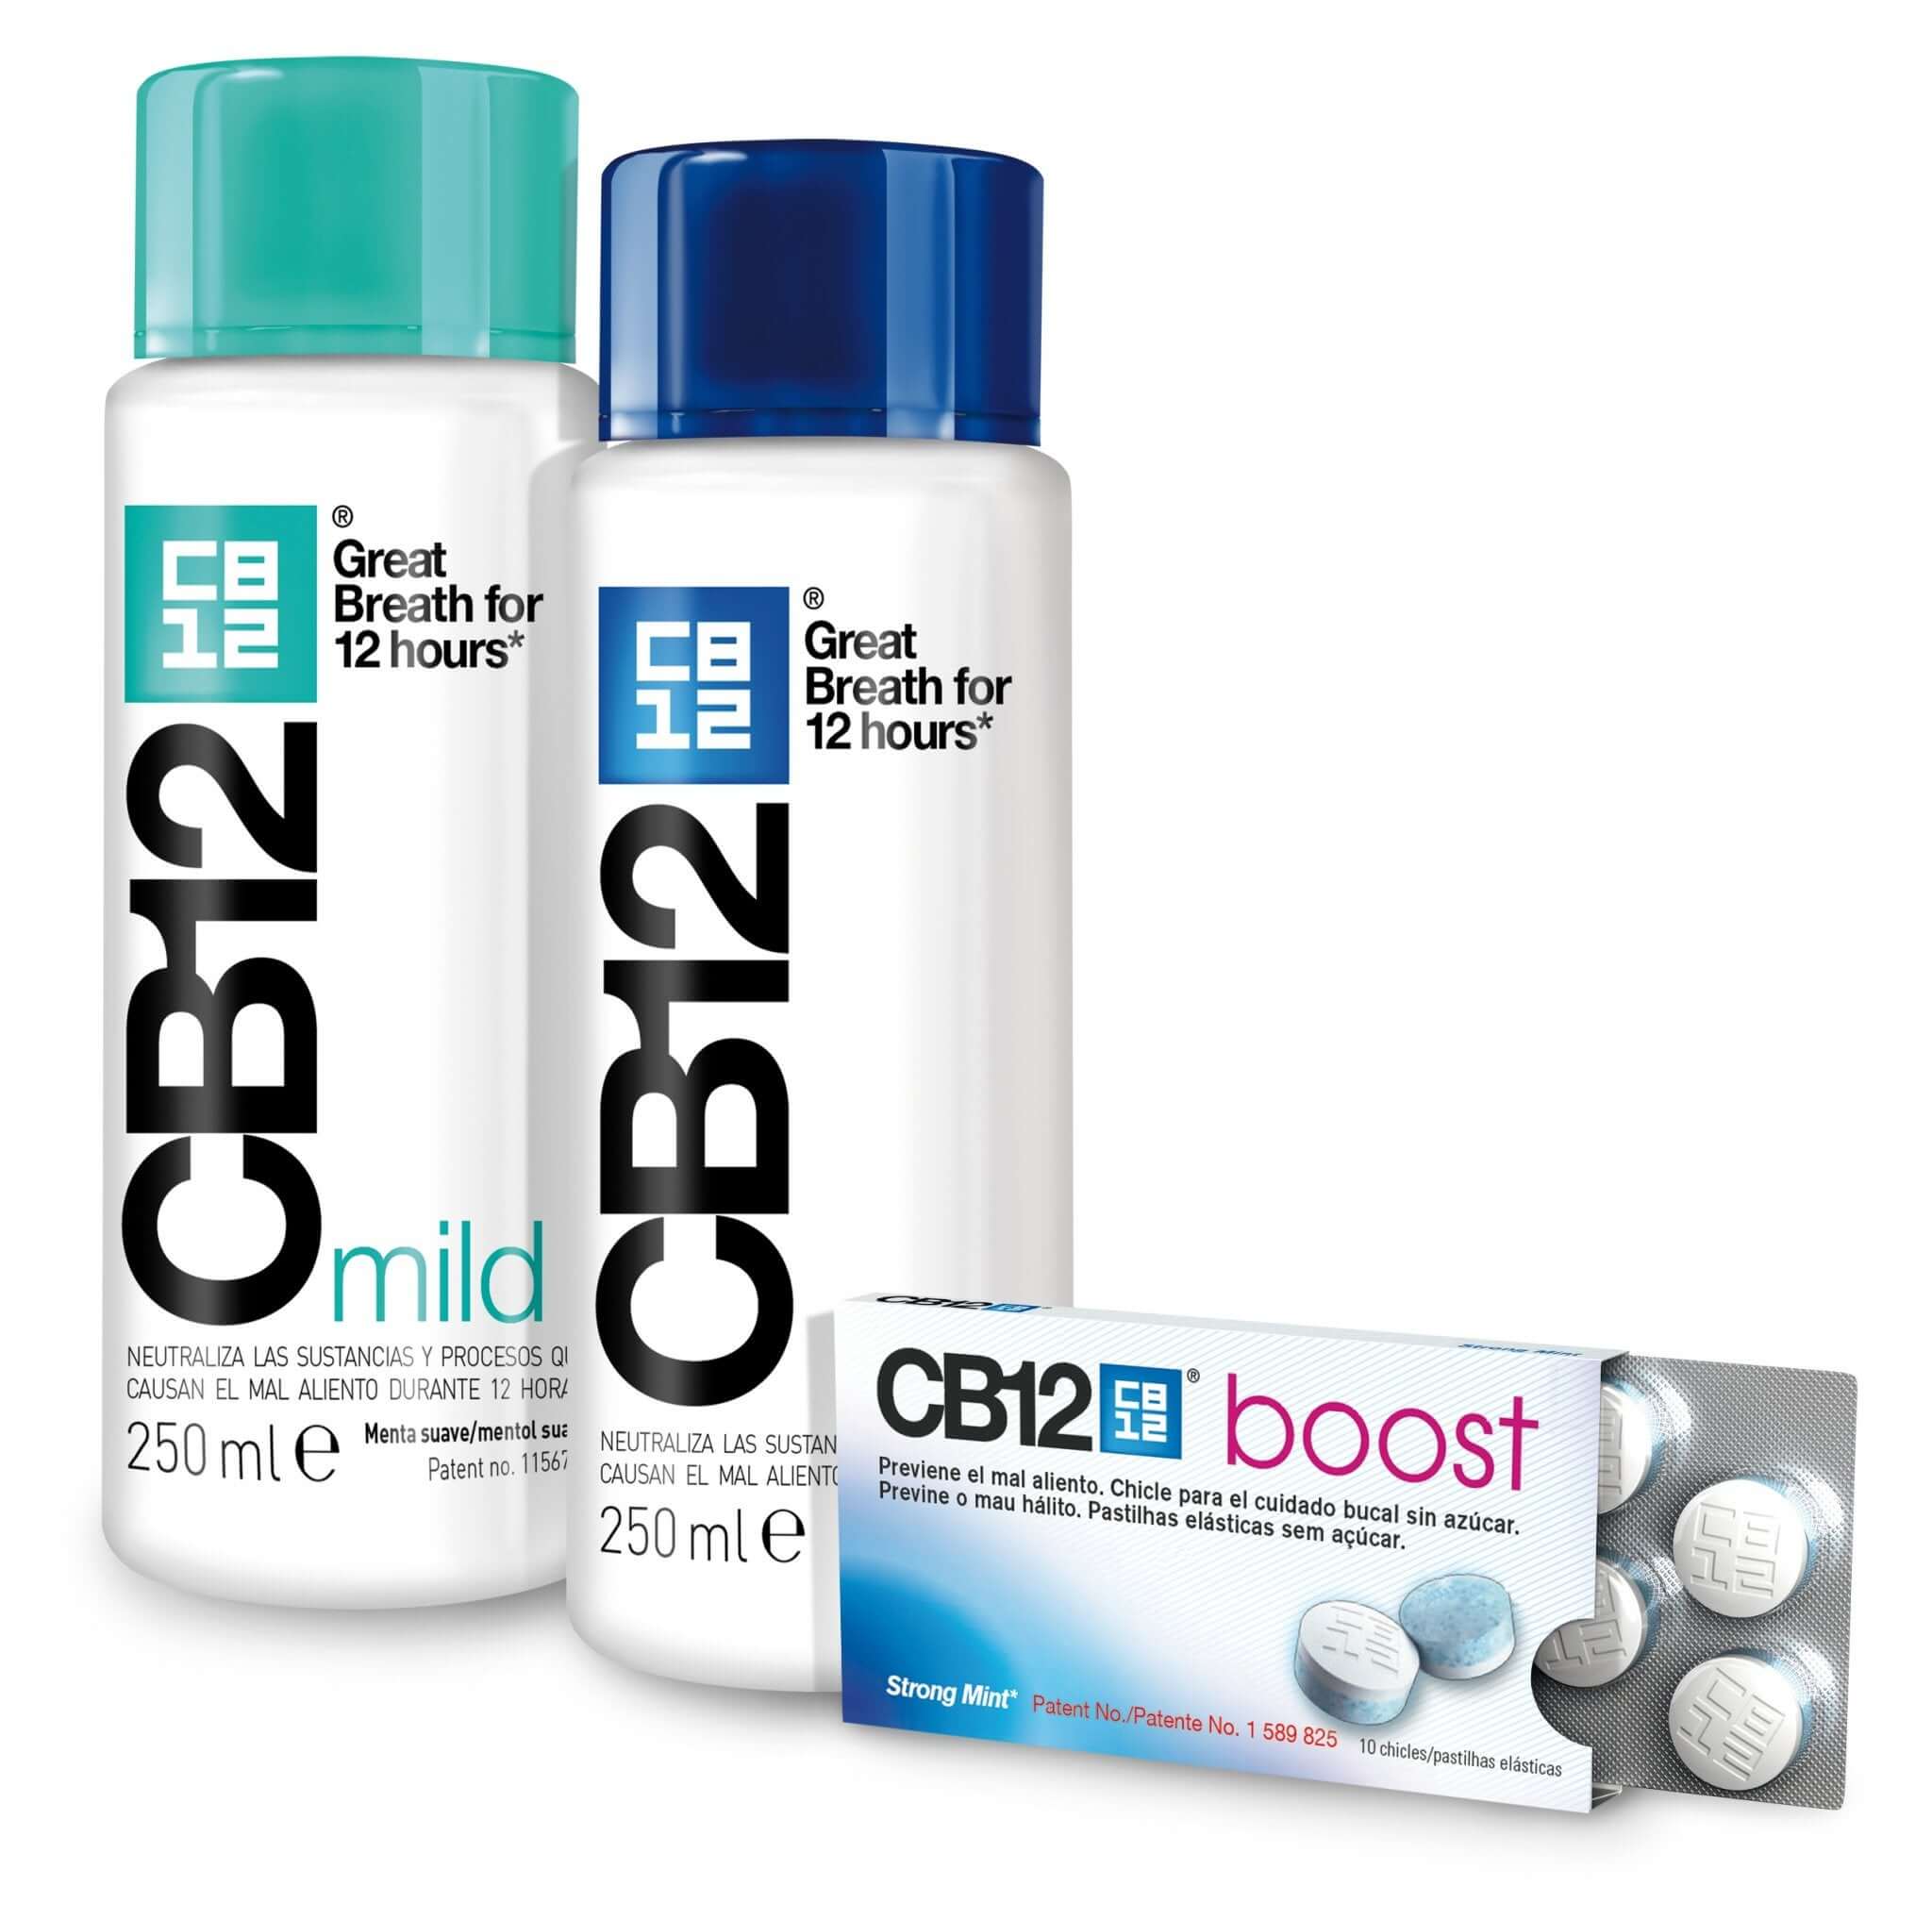 CB12 boost gum and mouthwash.